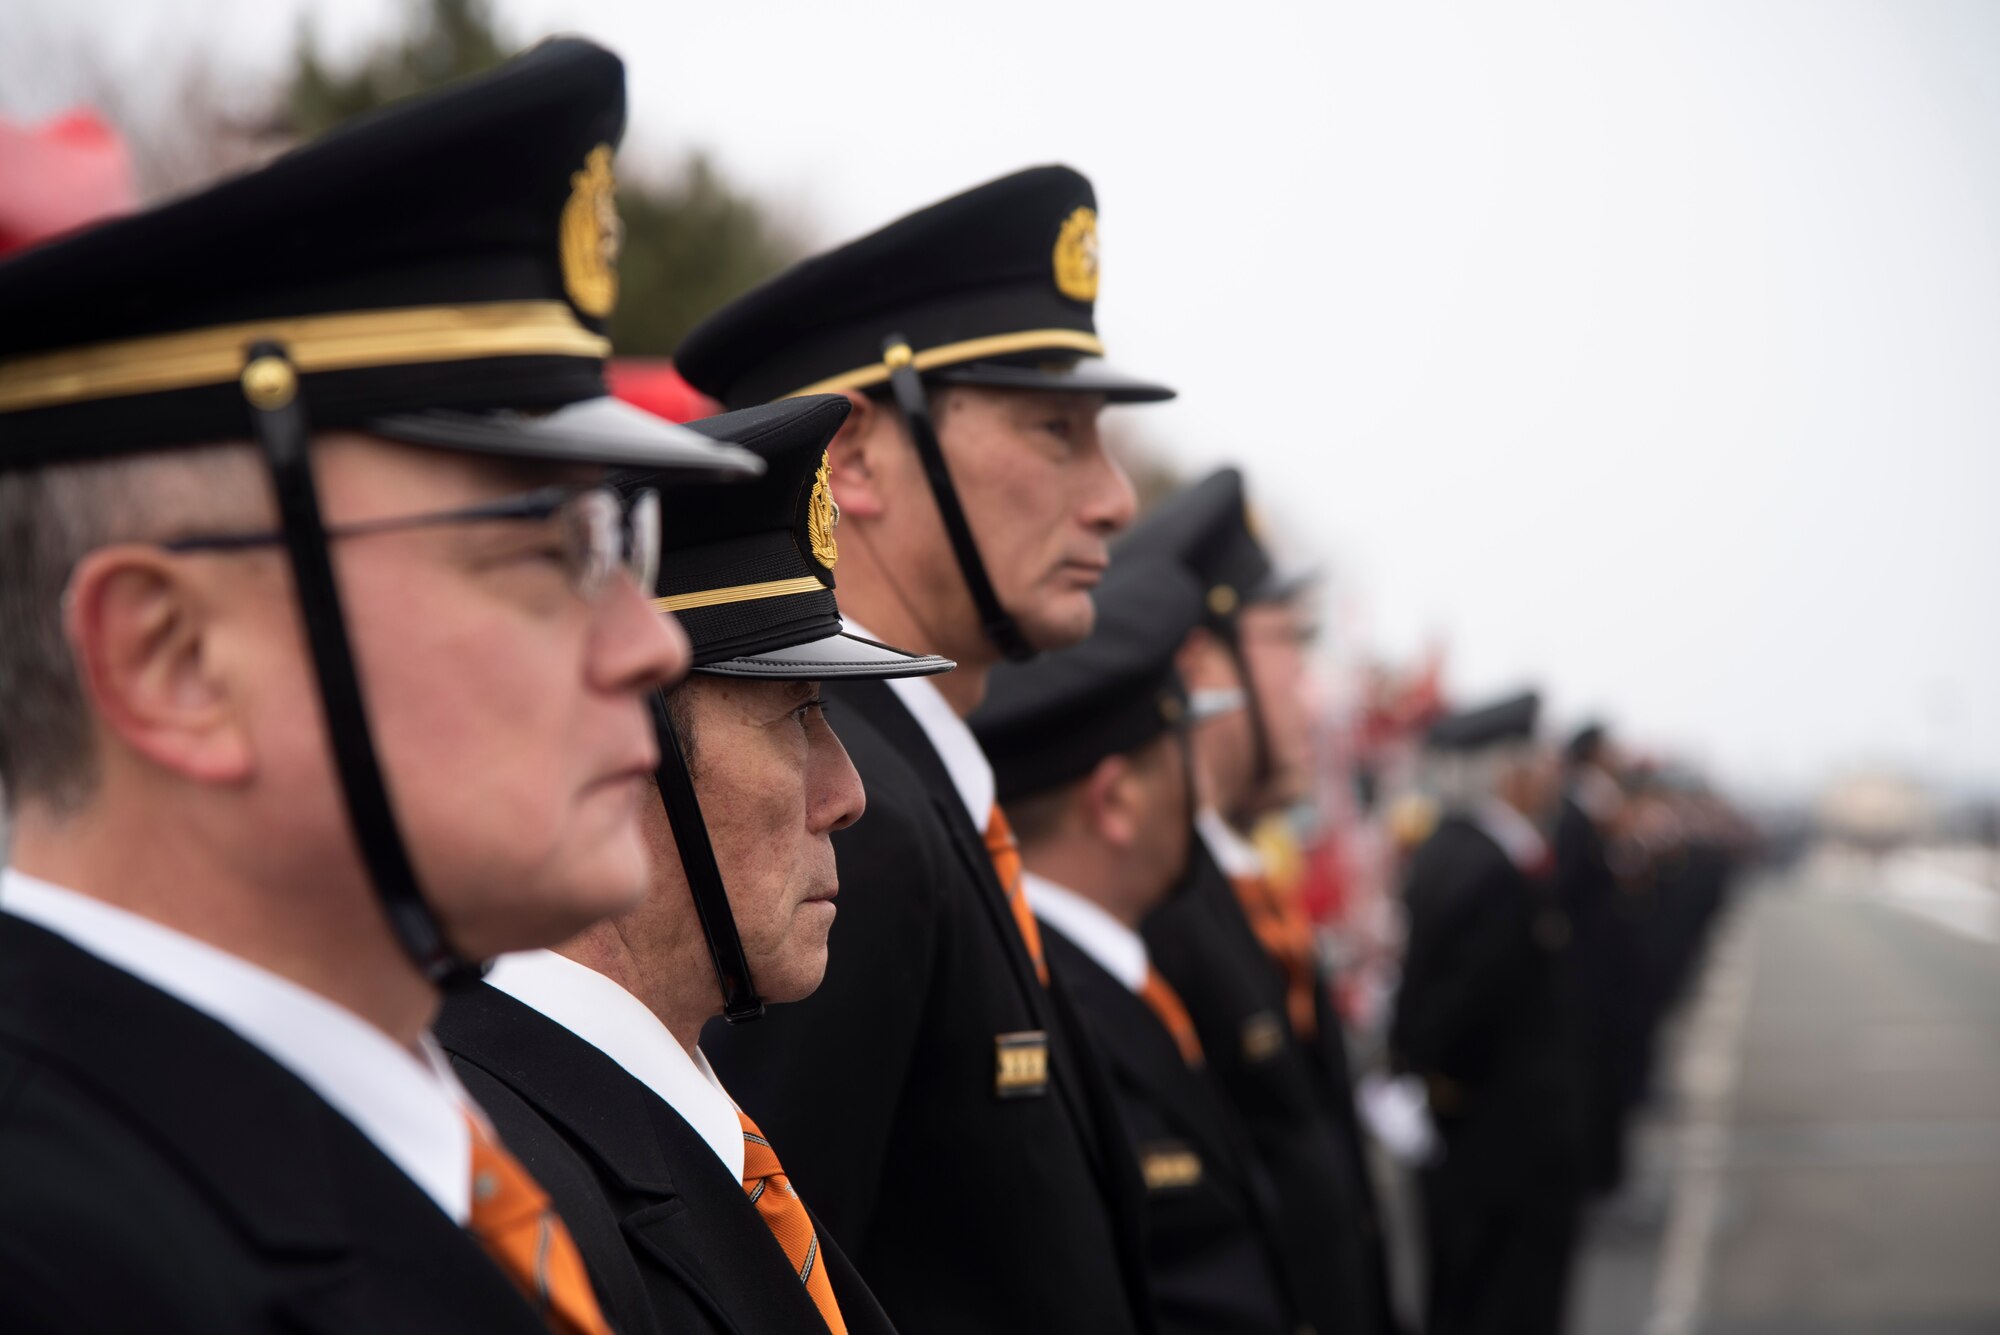 Misawa City volunteer firefighters line up during the annual Misawa City Fire Department New Year ceremony at Misawa City, Japan, Jan. 20, 2019. Misawa City’s fire department units include more than 300 trained professionals and various volunteers who make up individual supporting committees. Many locals attended the parade in order to wish the city and Misawa Air Base’s Fire Department a safe year as they continue to fight fires and protect homes. (U.S. Air Force photo by Senior Airman Sadie Colbert)